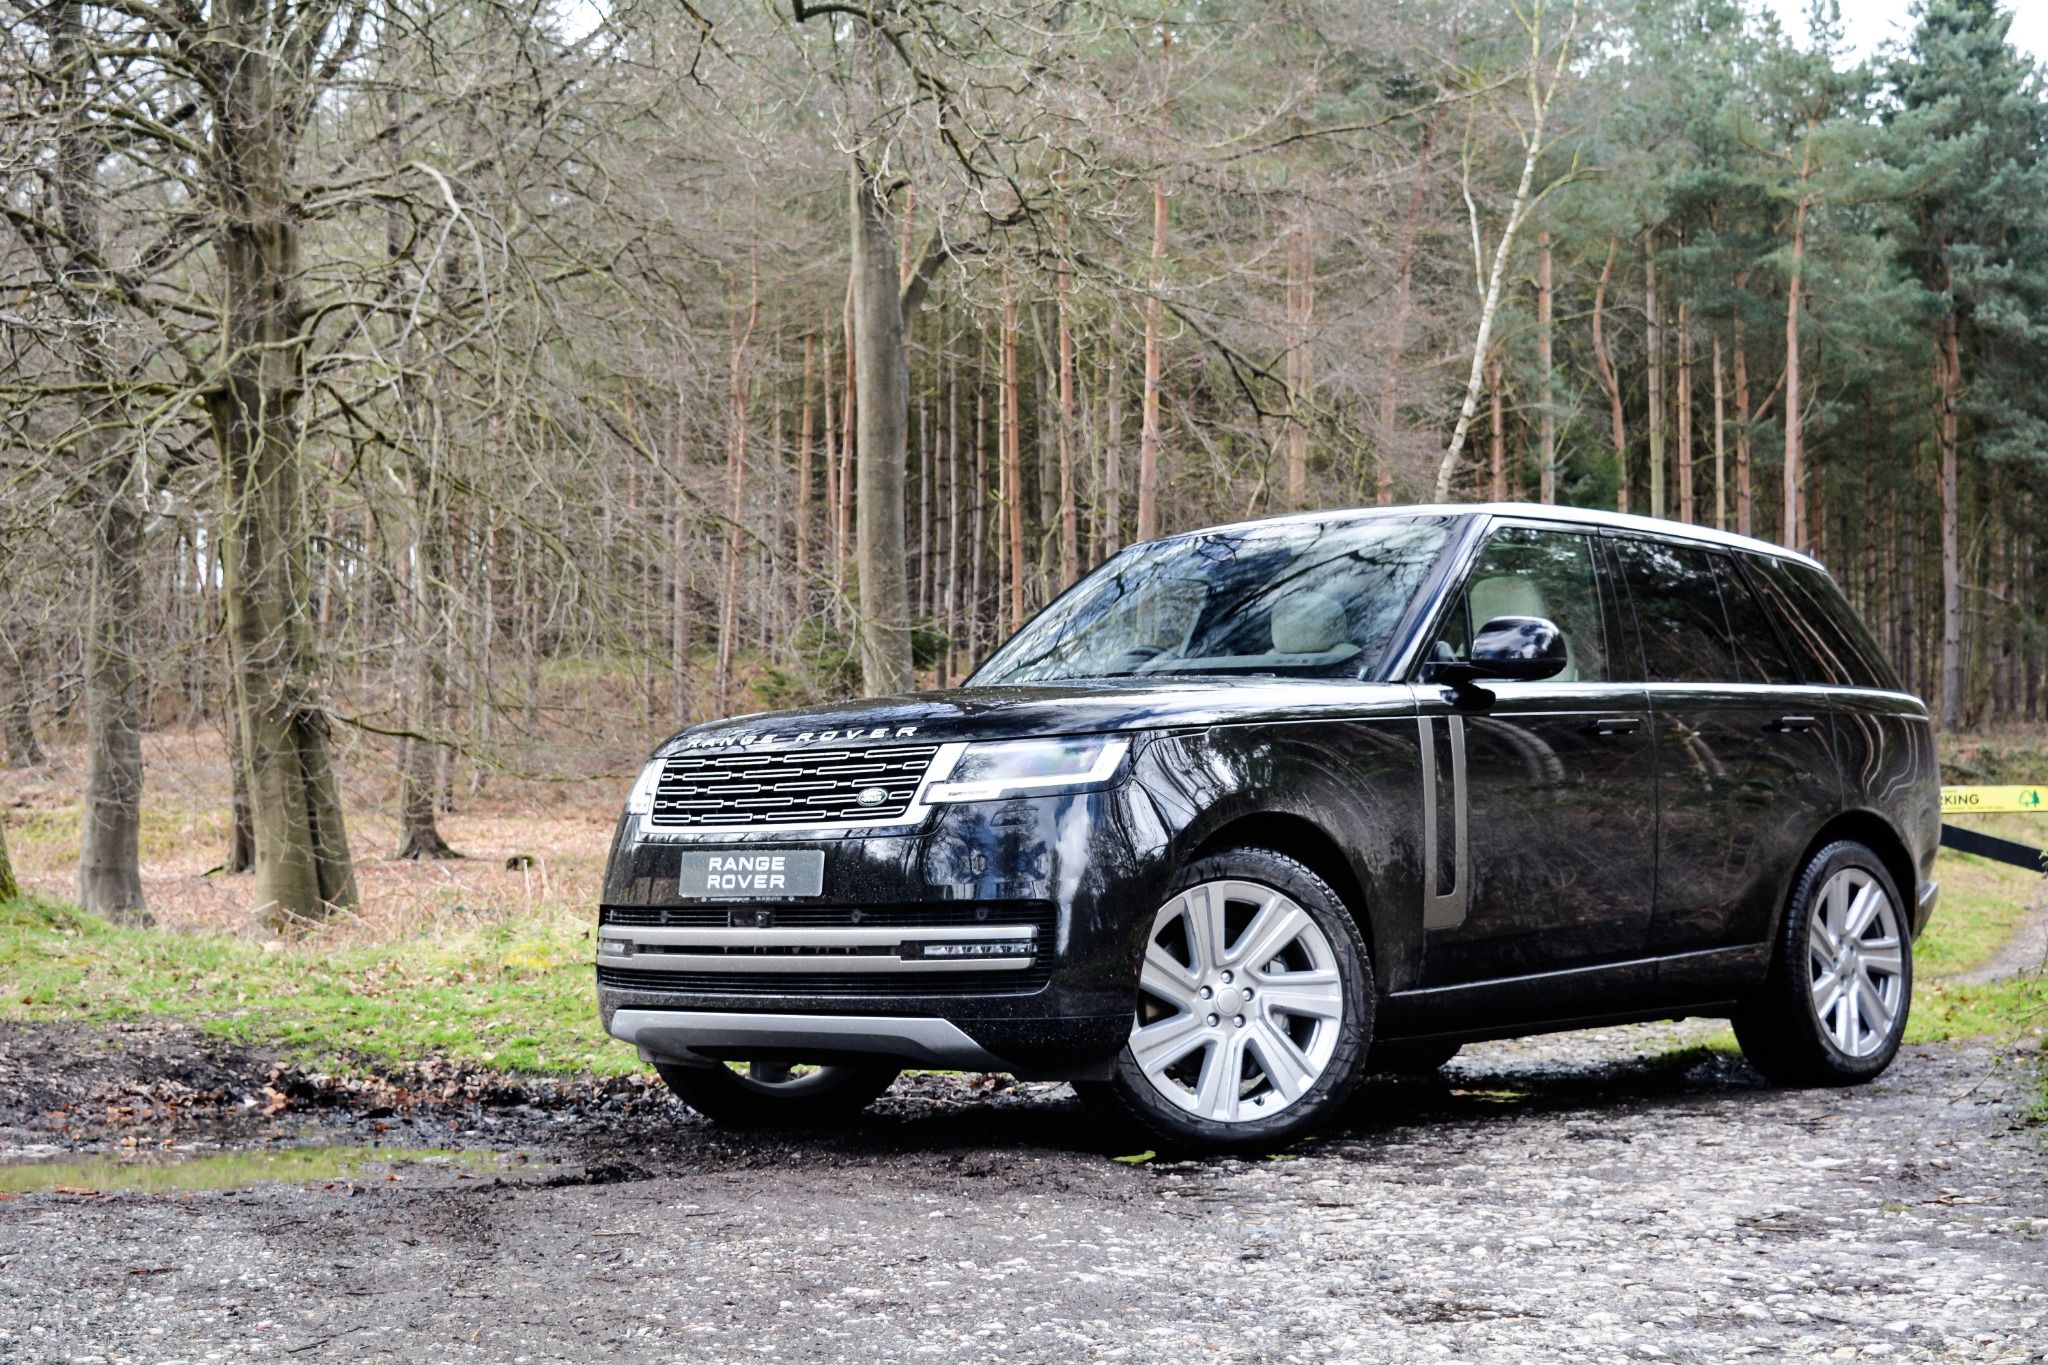 Range Rover parked in the Woods